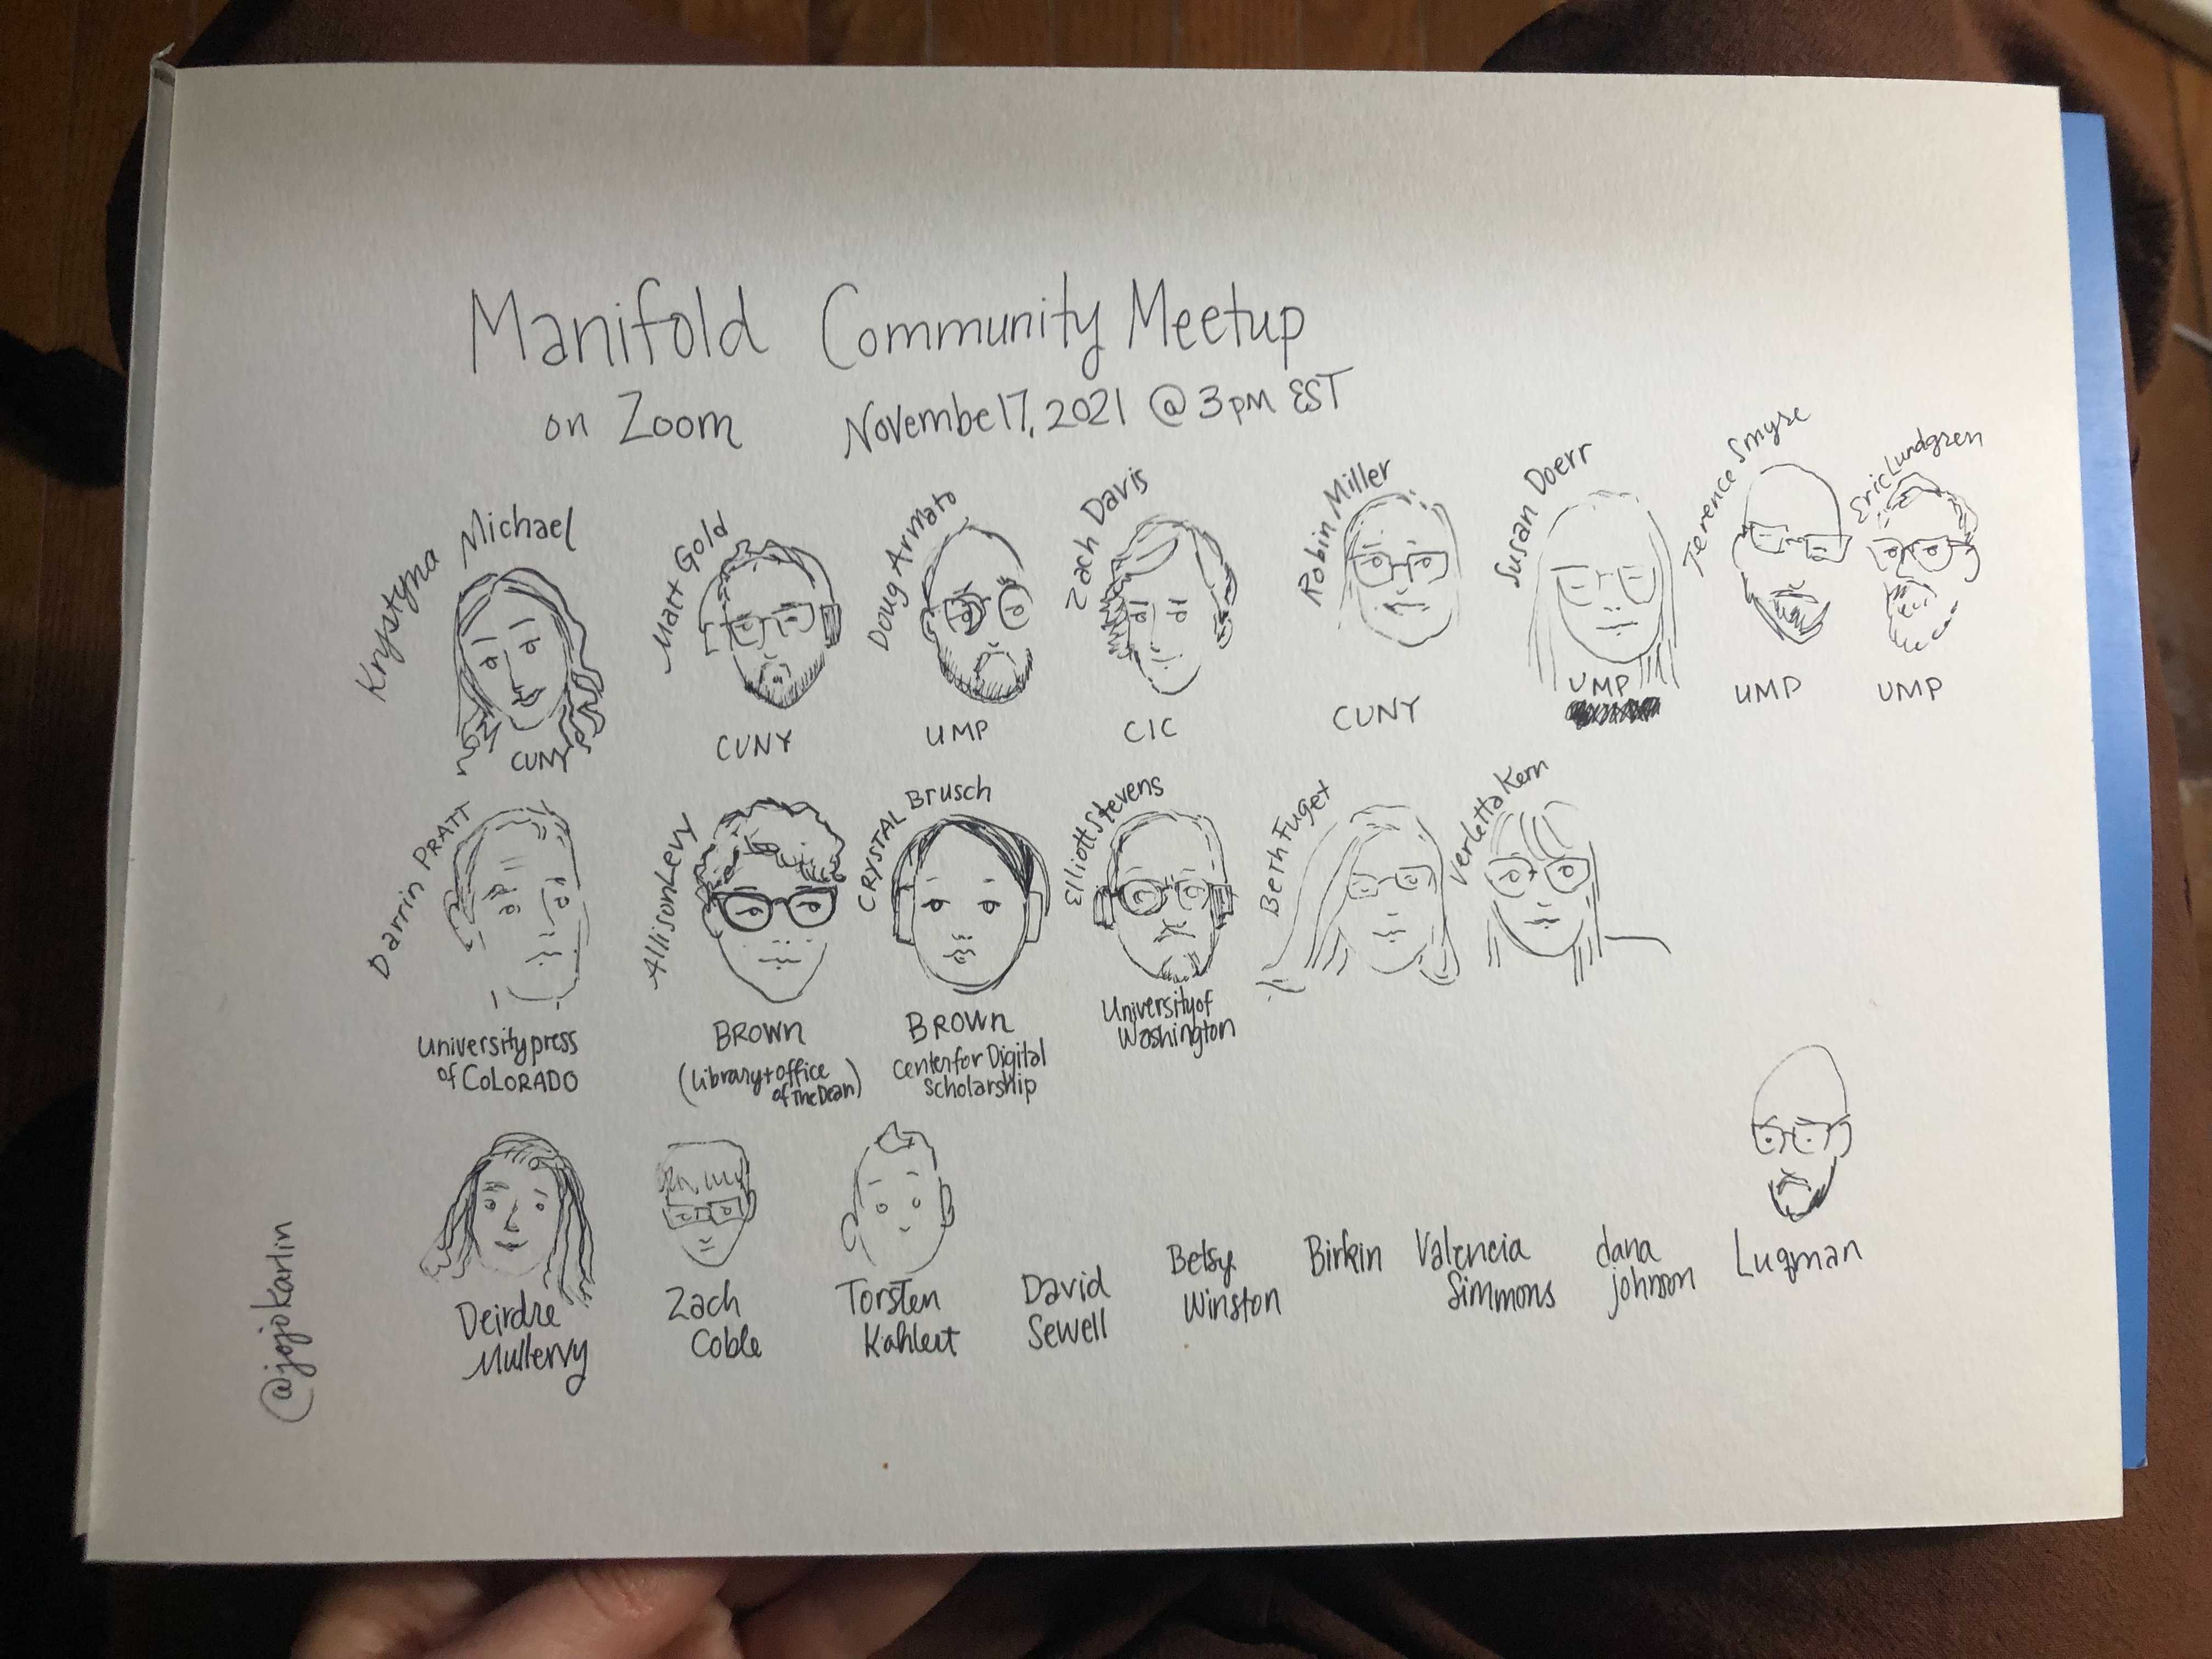 Hand-drawn portraits of the Manifold team members who presented.